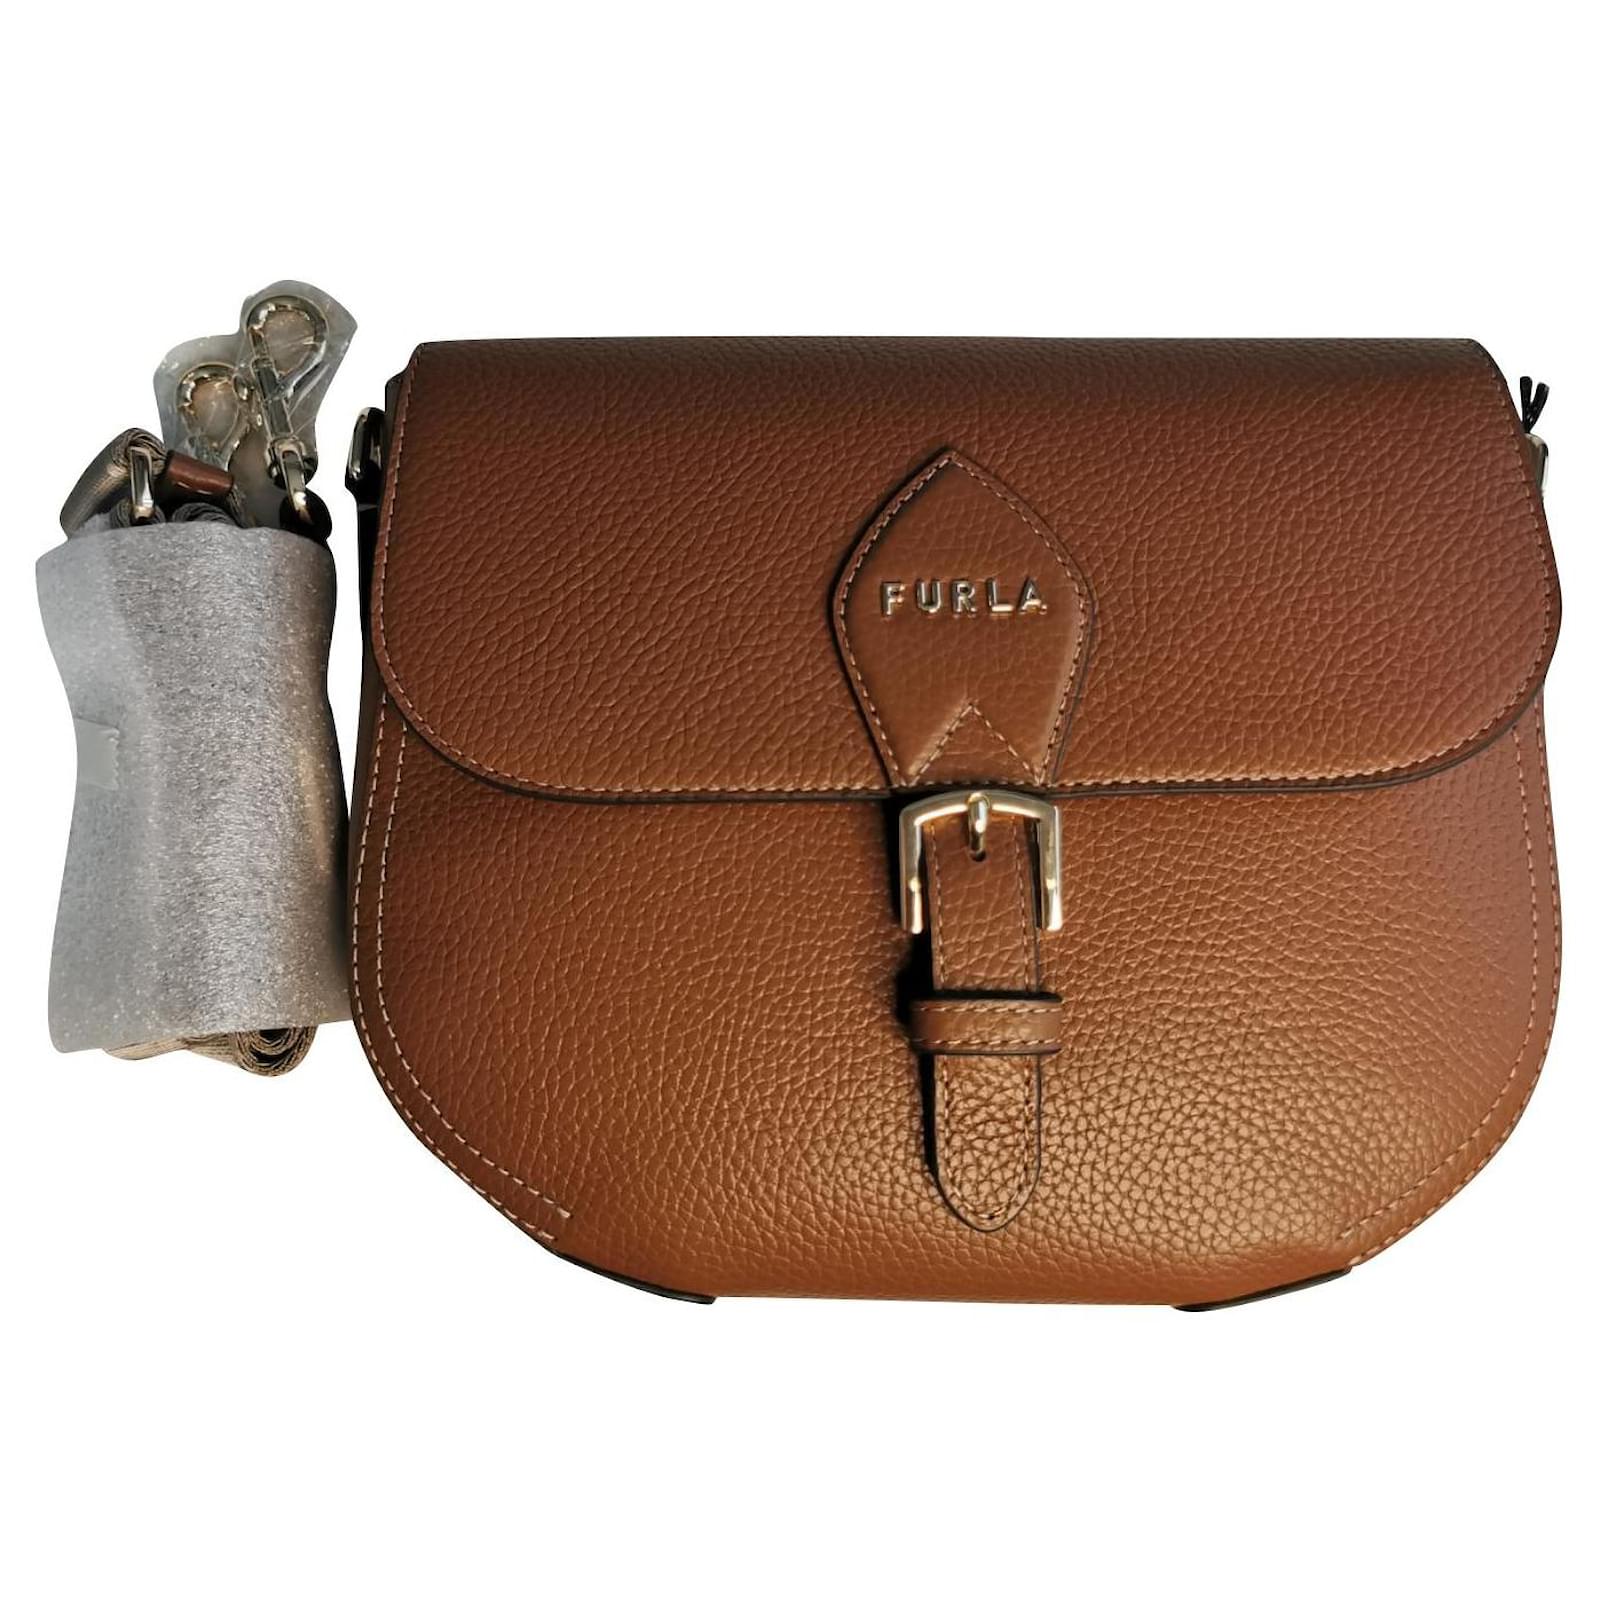 Furla leather purse - clothing & accessories - by owner - apparel sale -  craigslist